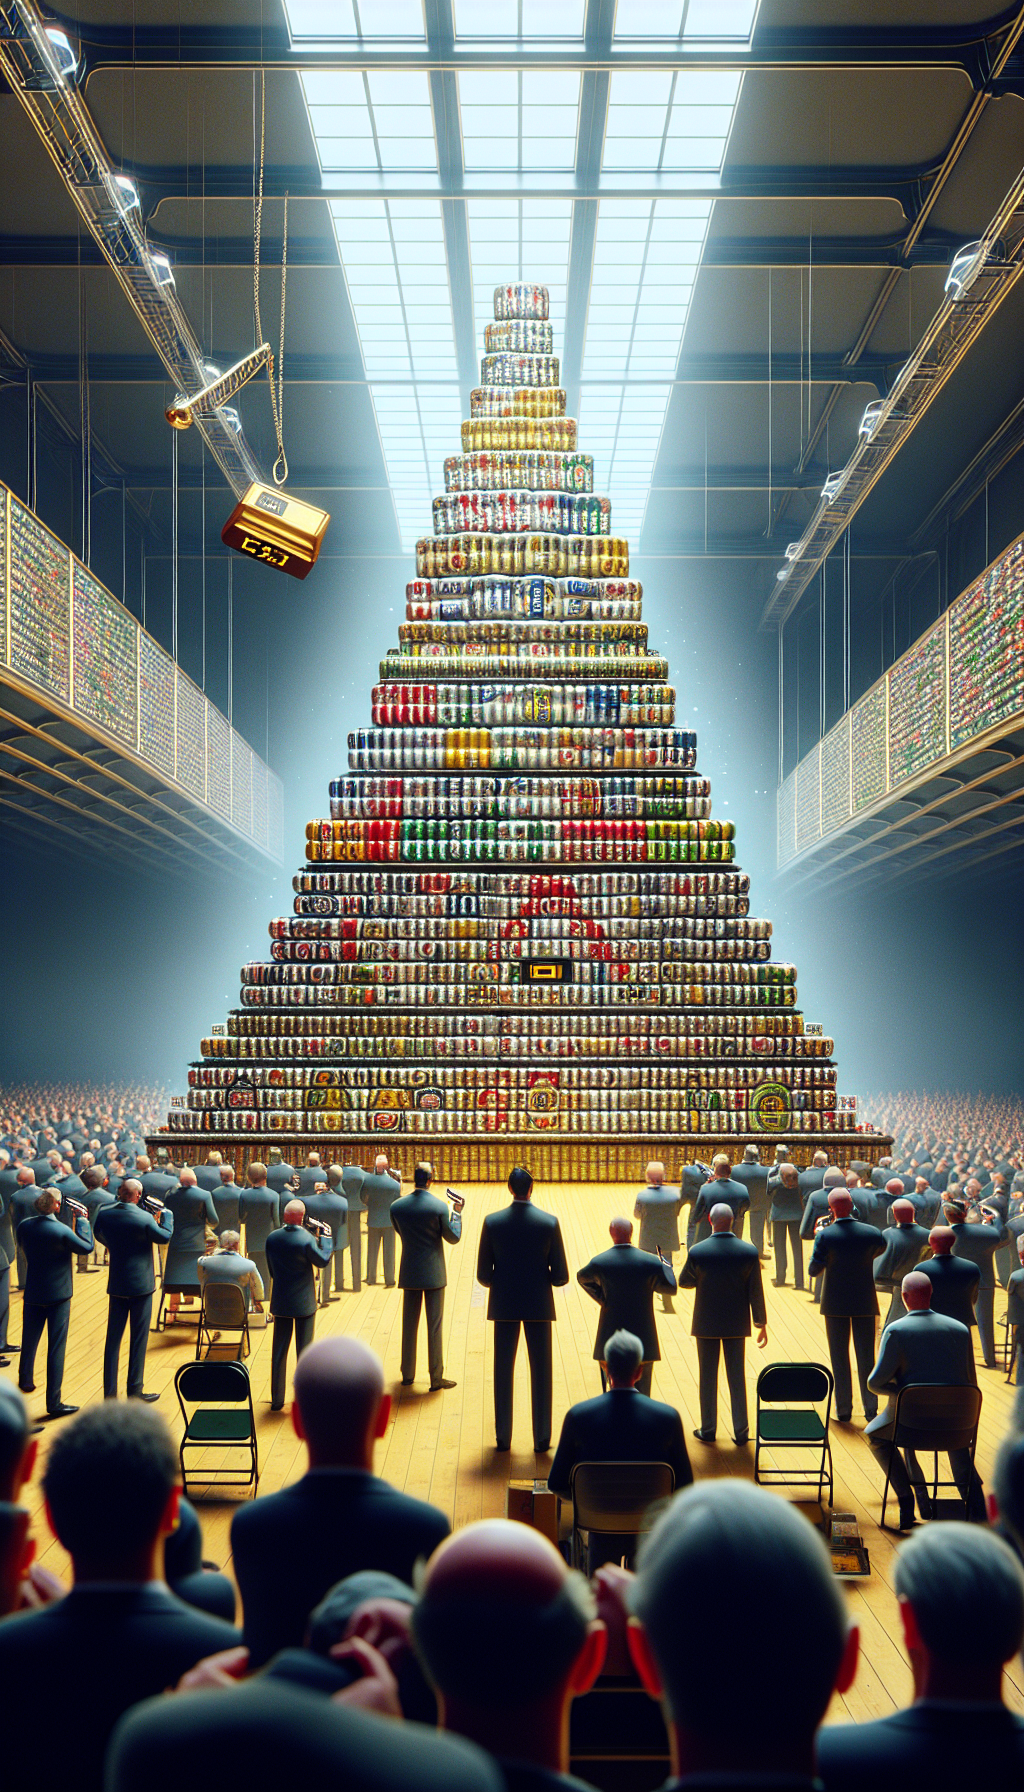 An illustration showcasing a towering, shimmering pyramid of vintage beer cans from floor to ceiling, with collectors and enthusiasts using magnifying glasses to inspect each can's rarity and condition. At the base of the pyramid, a prominent price tag flips dynamically, reflecting fluctuating market values while an auctioneer's gavel hangs mid-air, emphasizing the excitement of the collectible beer can market boom.